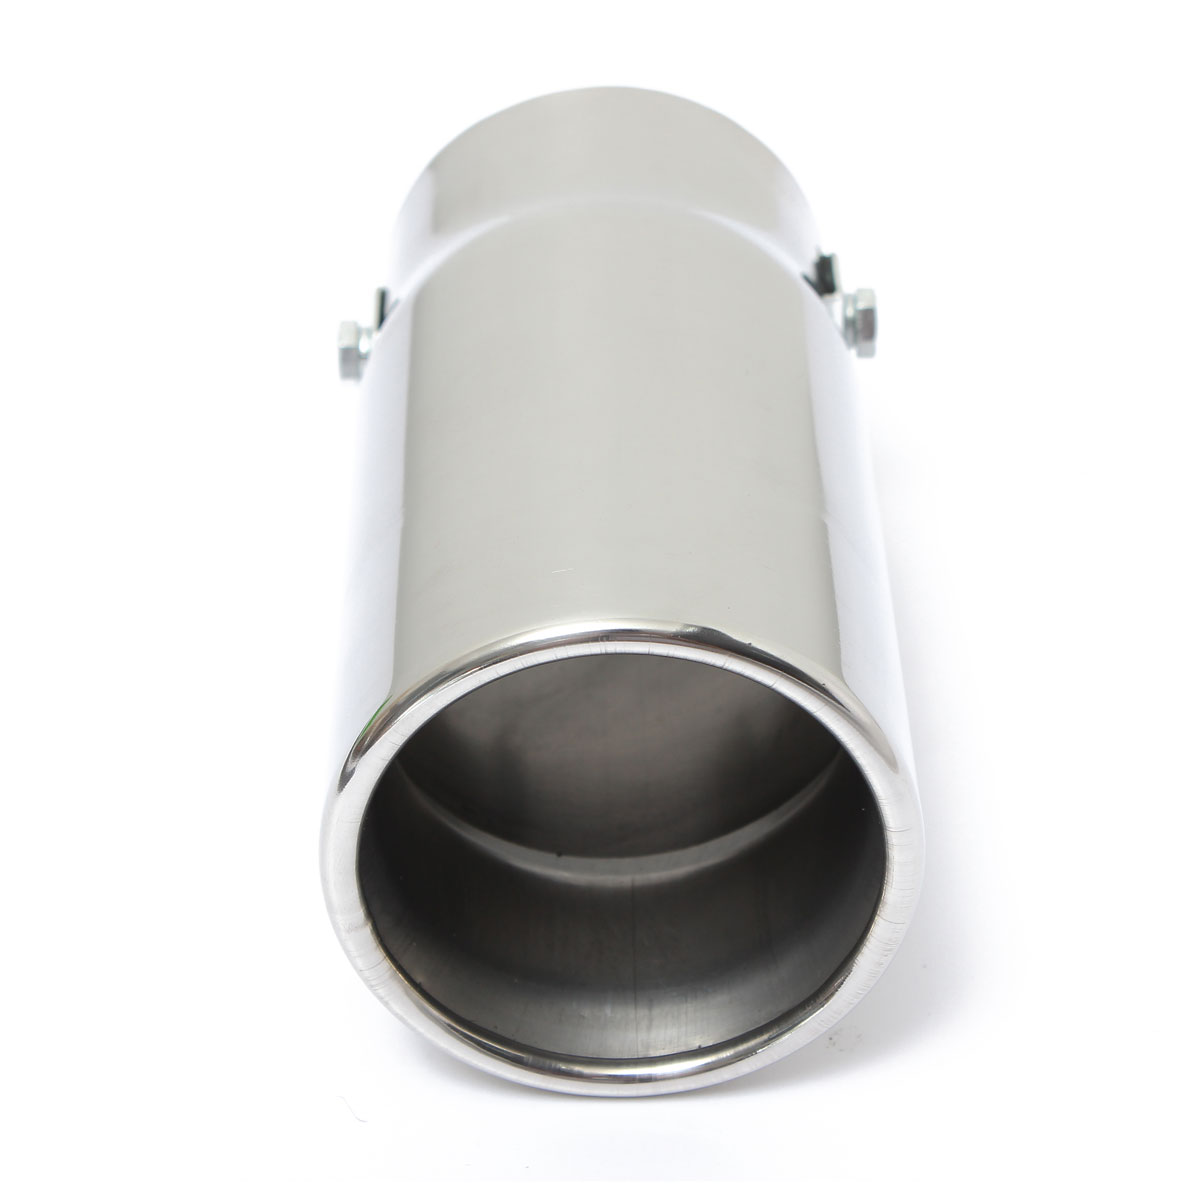 Details about   STAINLESS STEEL TWIN  ROUND CHROME CAR EXHAUST TAIL PIPE TRIM/MUFFLER TIP 2.6" 